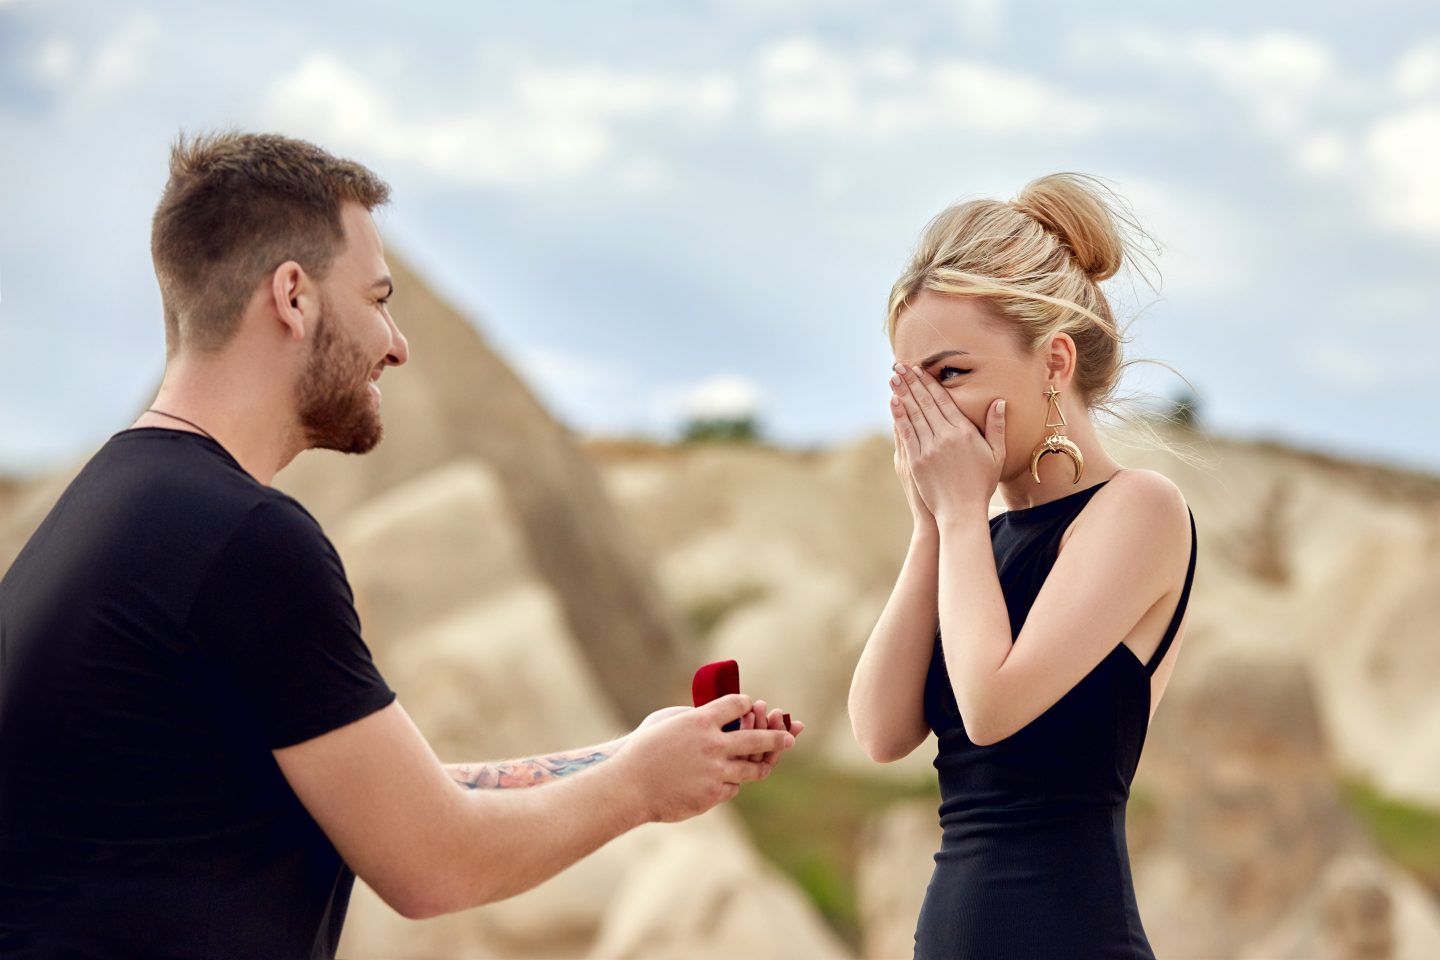 10 Creative Engagement Ideas to Make Your Special Moment Unforgettable